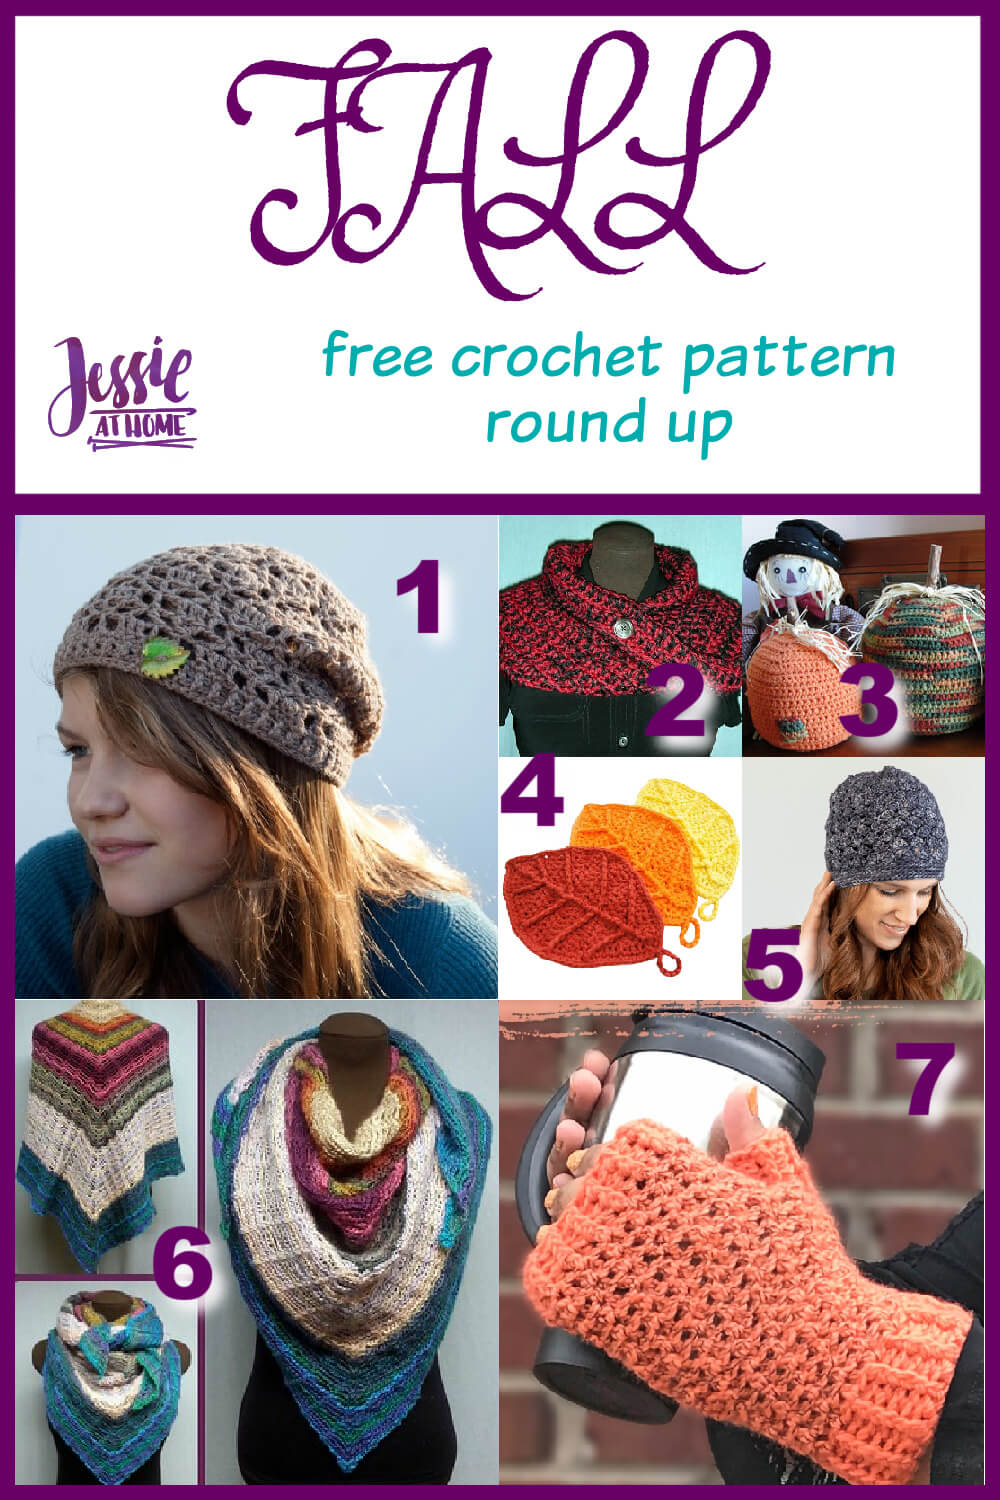 Fall Crochet Pattern Round Up from Jessie At Home - Pin 1